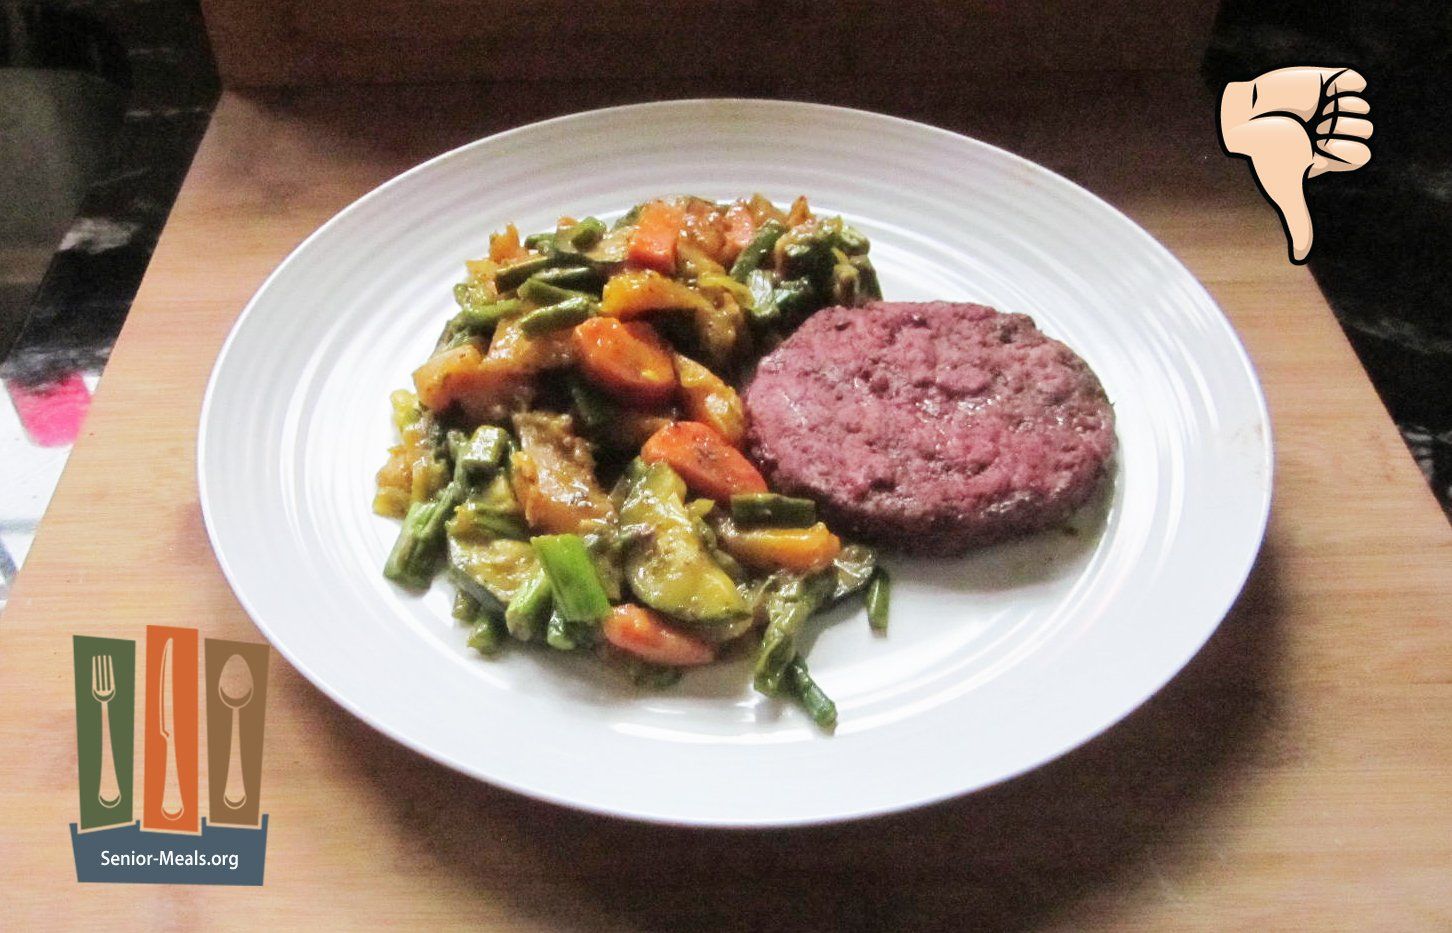 Roasted Squash and Beef Patty